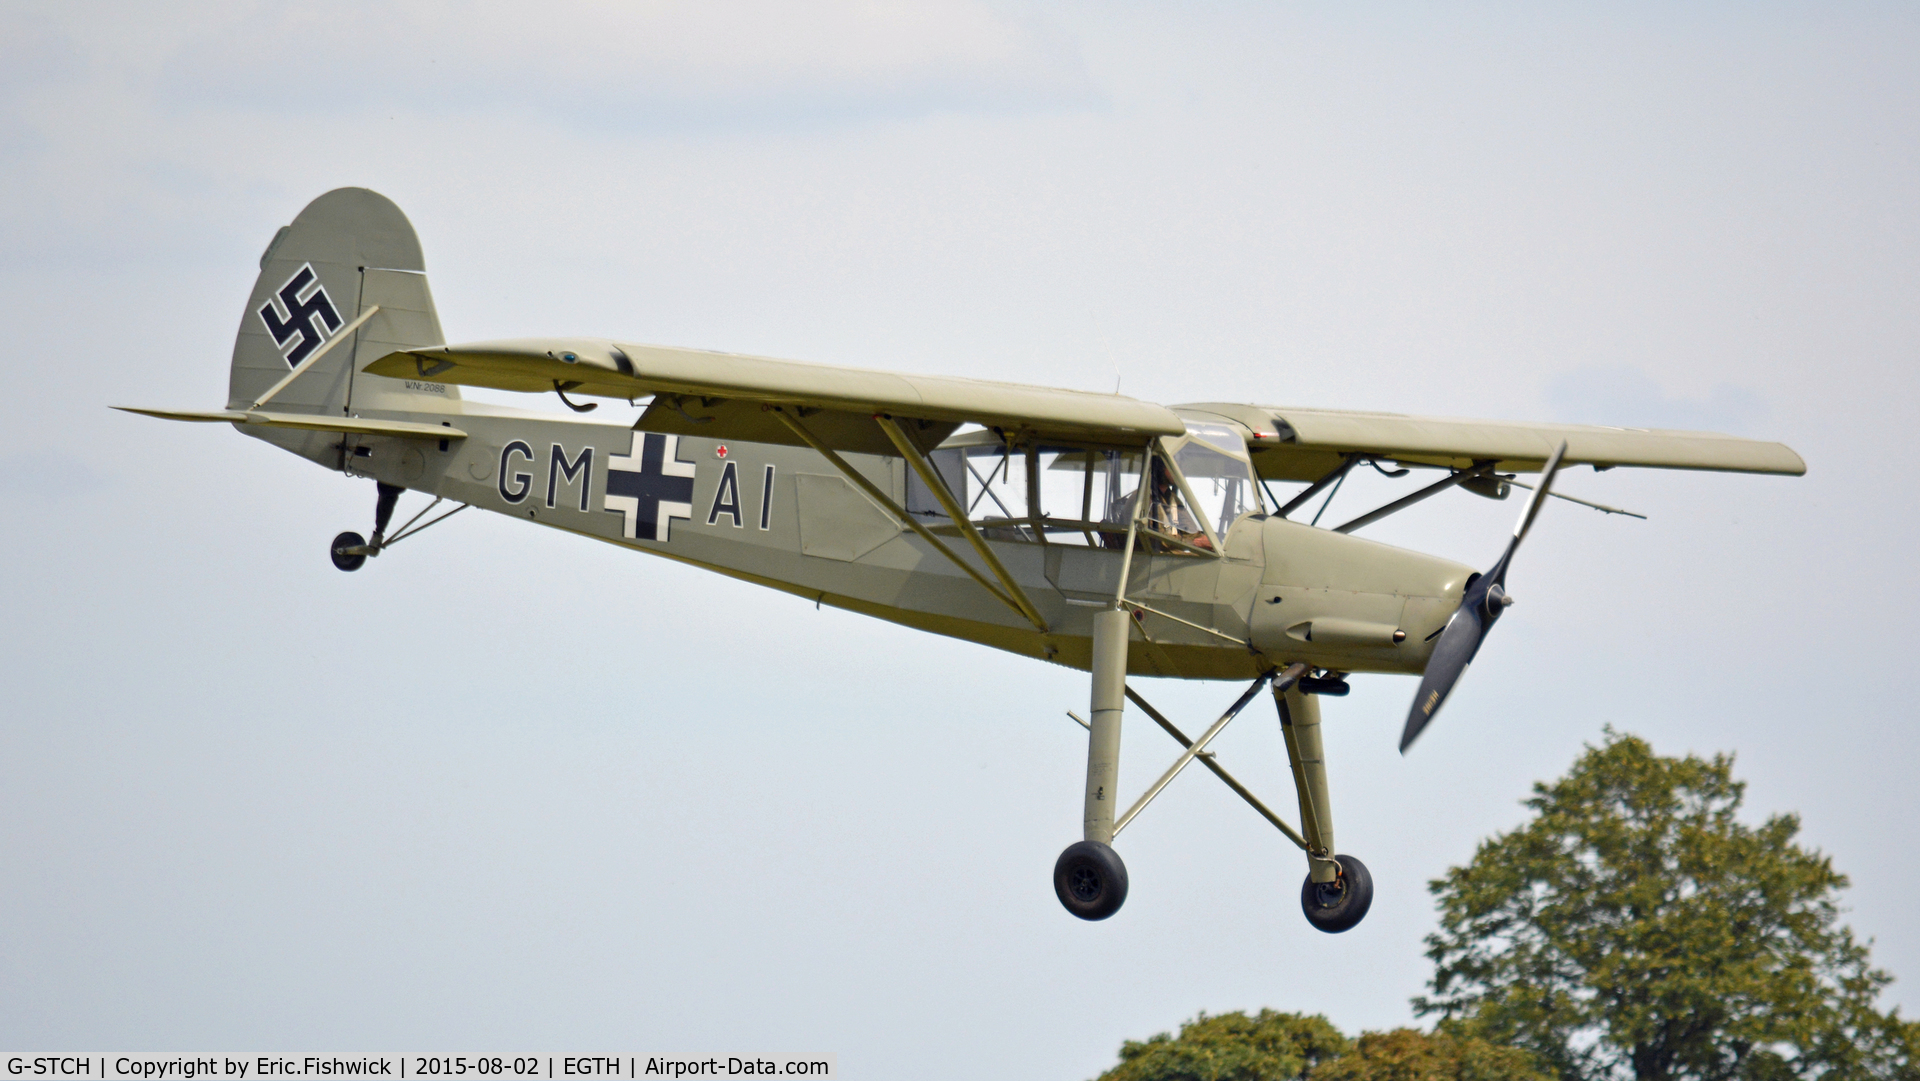 G-STCH, 1942 Fieseler Fi-156A-1 Storch C/N 2088, 42. G-STCH at the Shuttleworth Wings and Wheels Airshow, Aug. 2015.